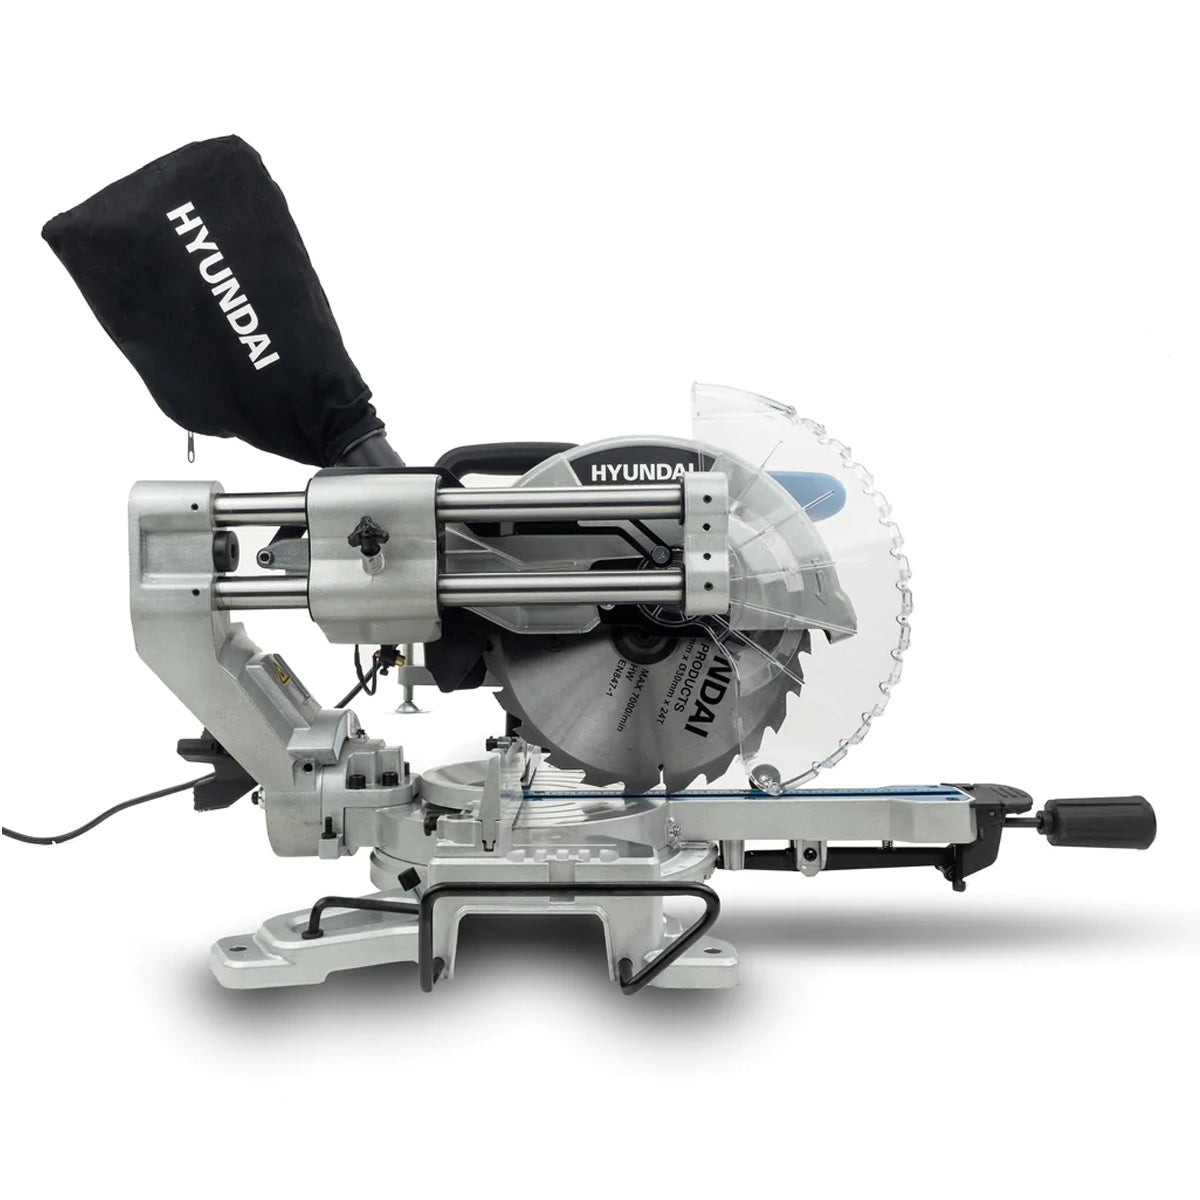 Hyundai HYMS2000E Mitre Saw 255mm with Laser 240V/2000W